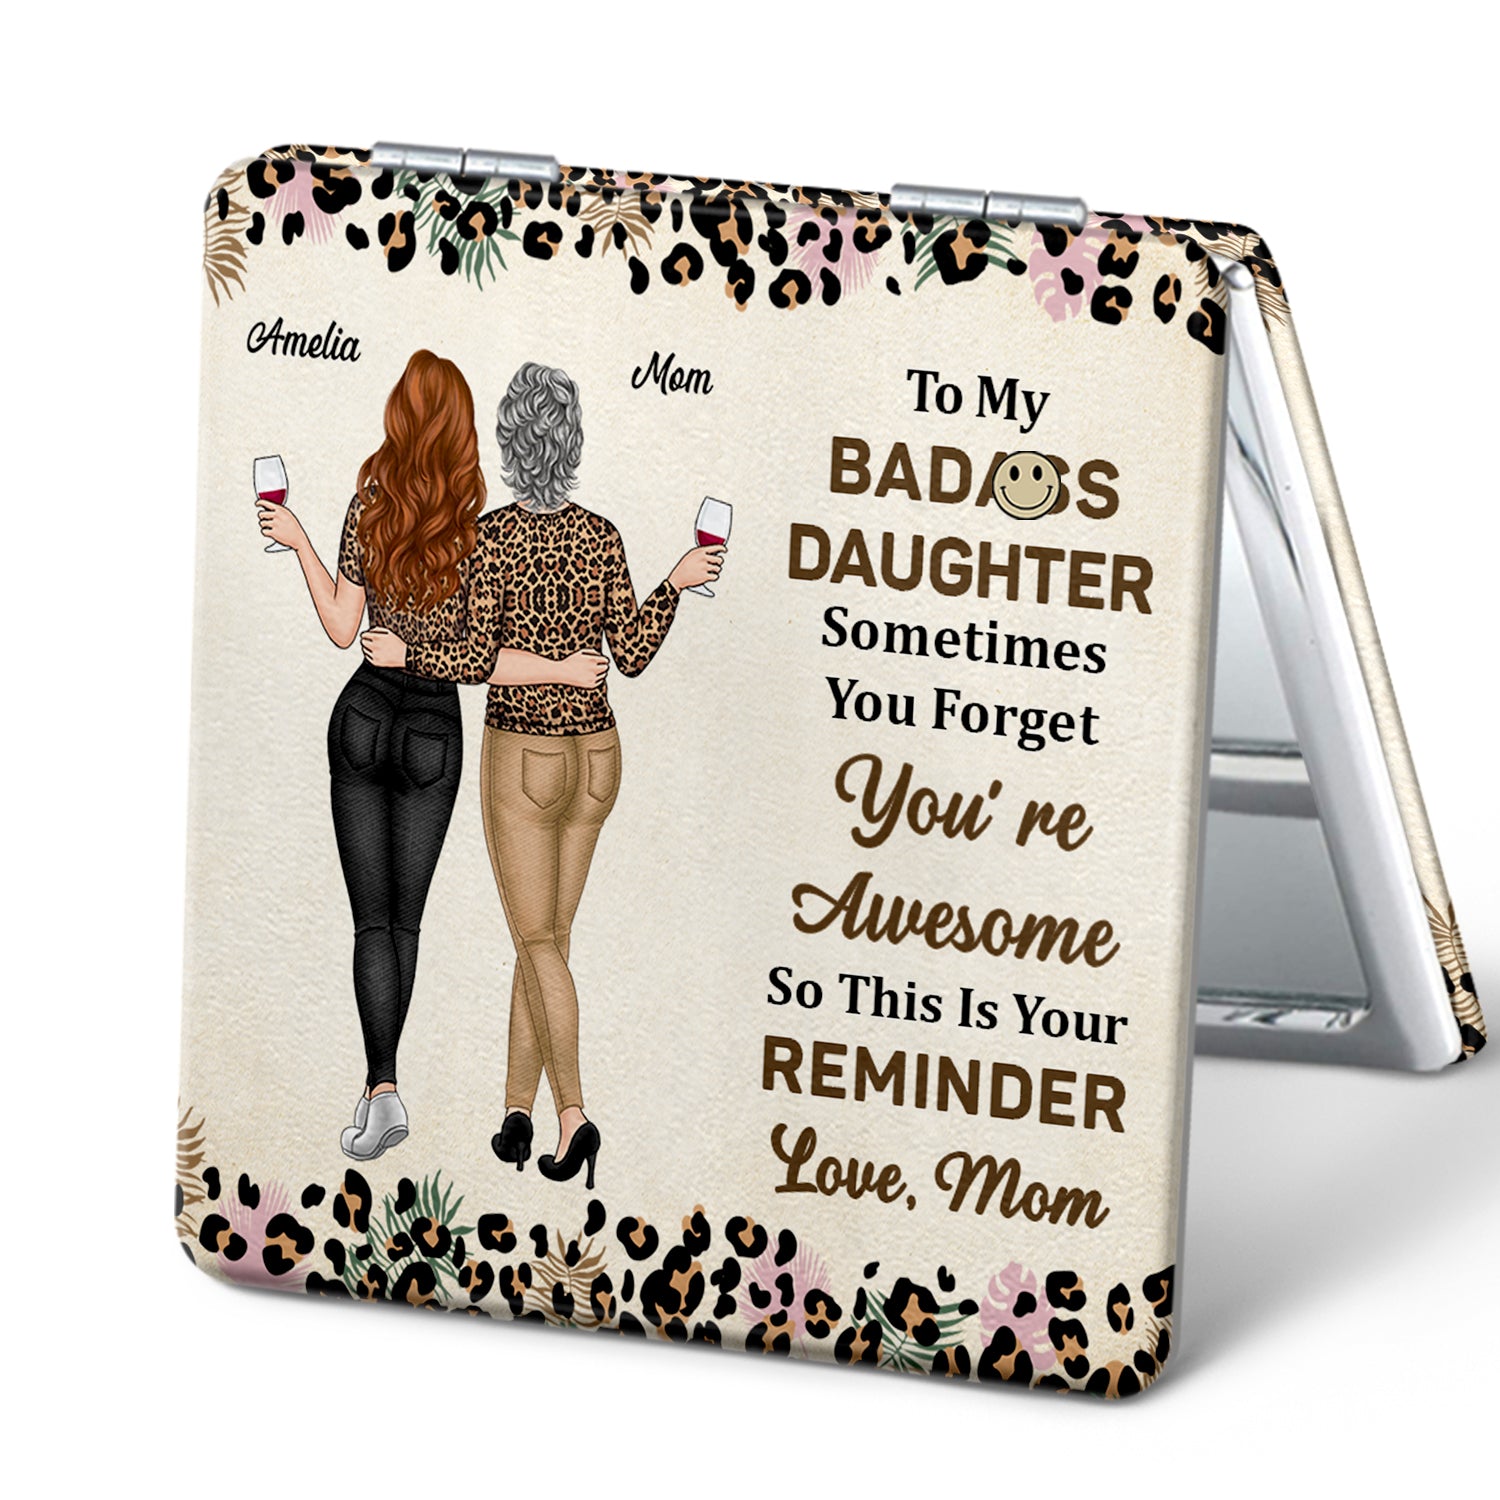 So This Is Your Reminder - Gift For Women, Daughter, Mom - Personalized Square Compact Mirror